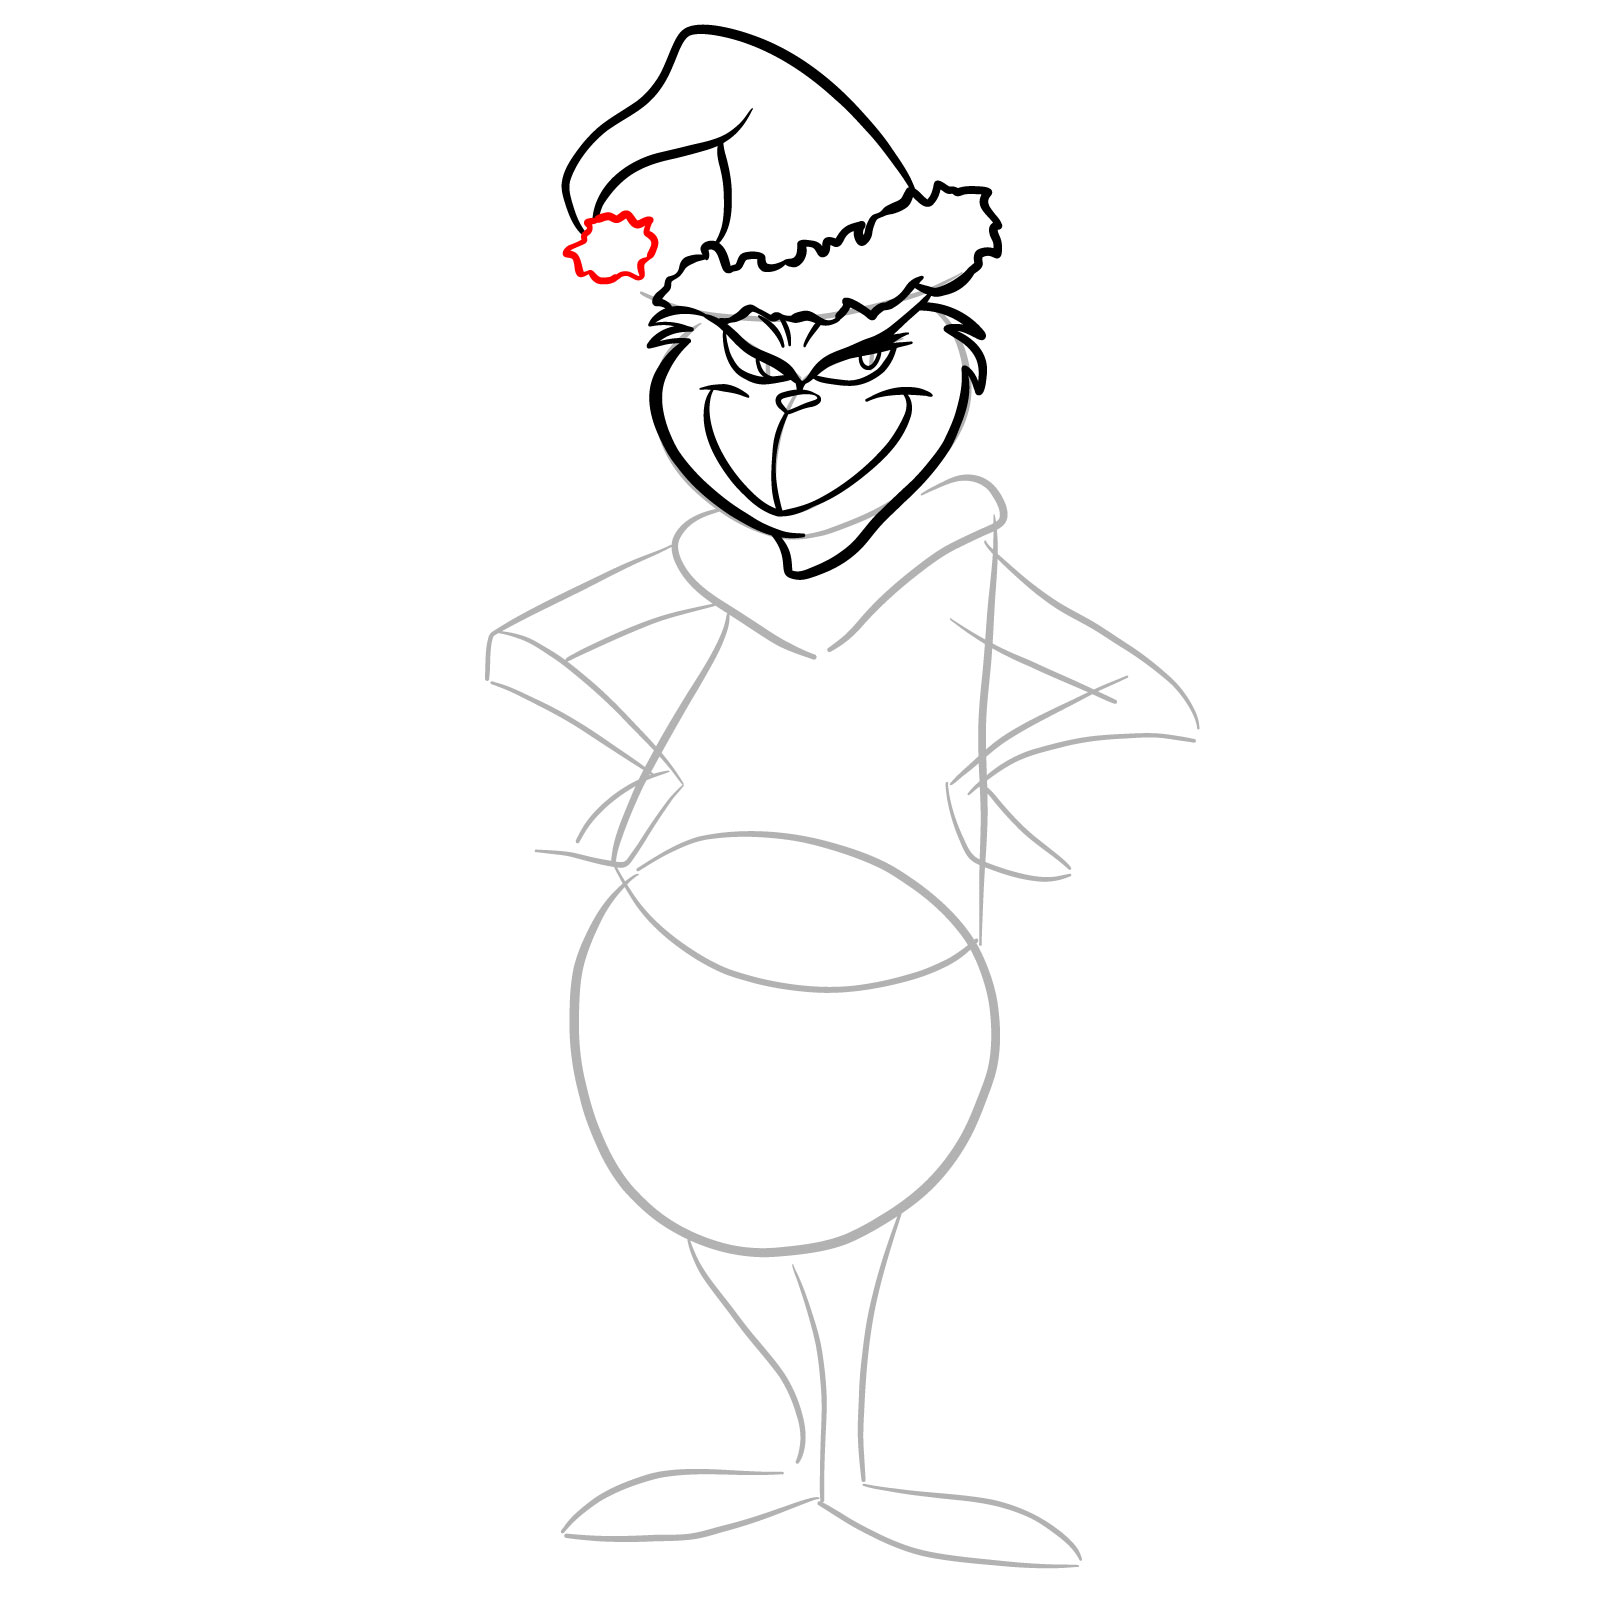 How to draw The Grinch in a Christmas costume - step 11